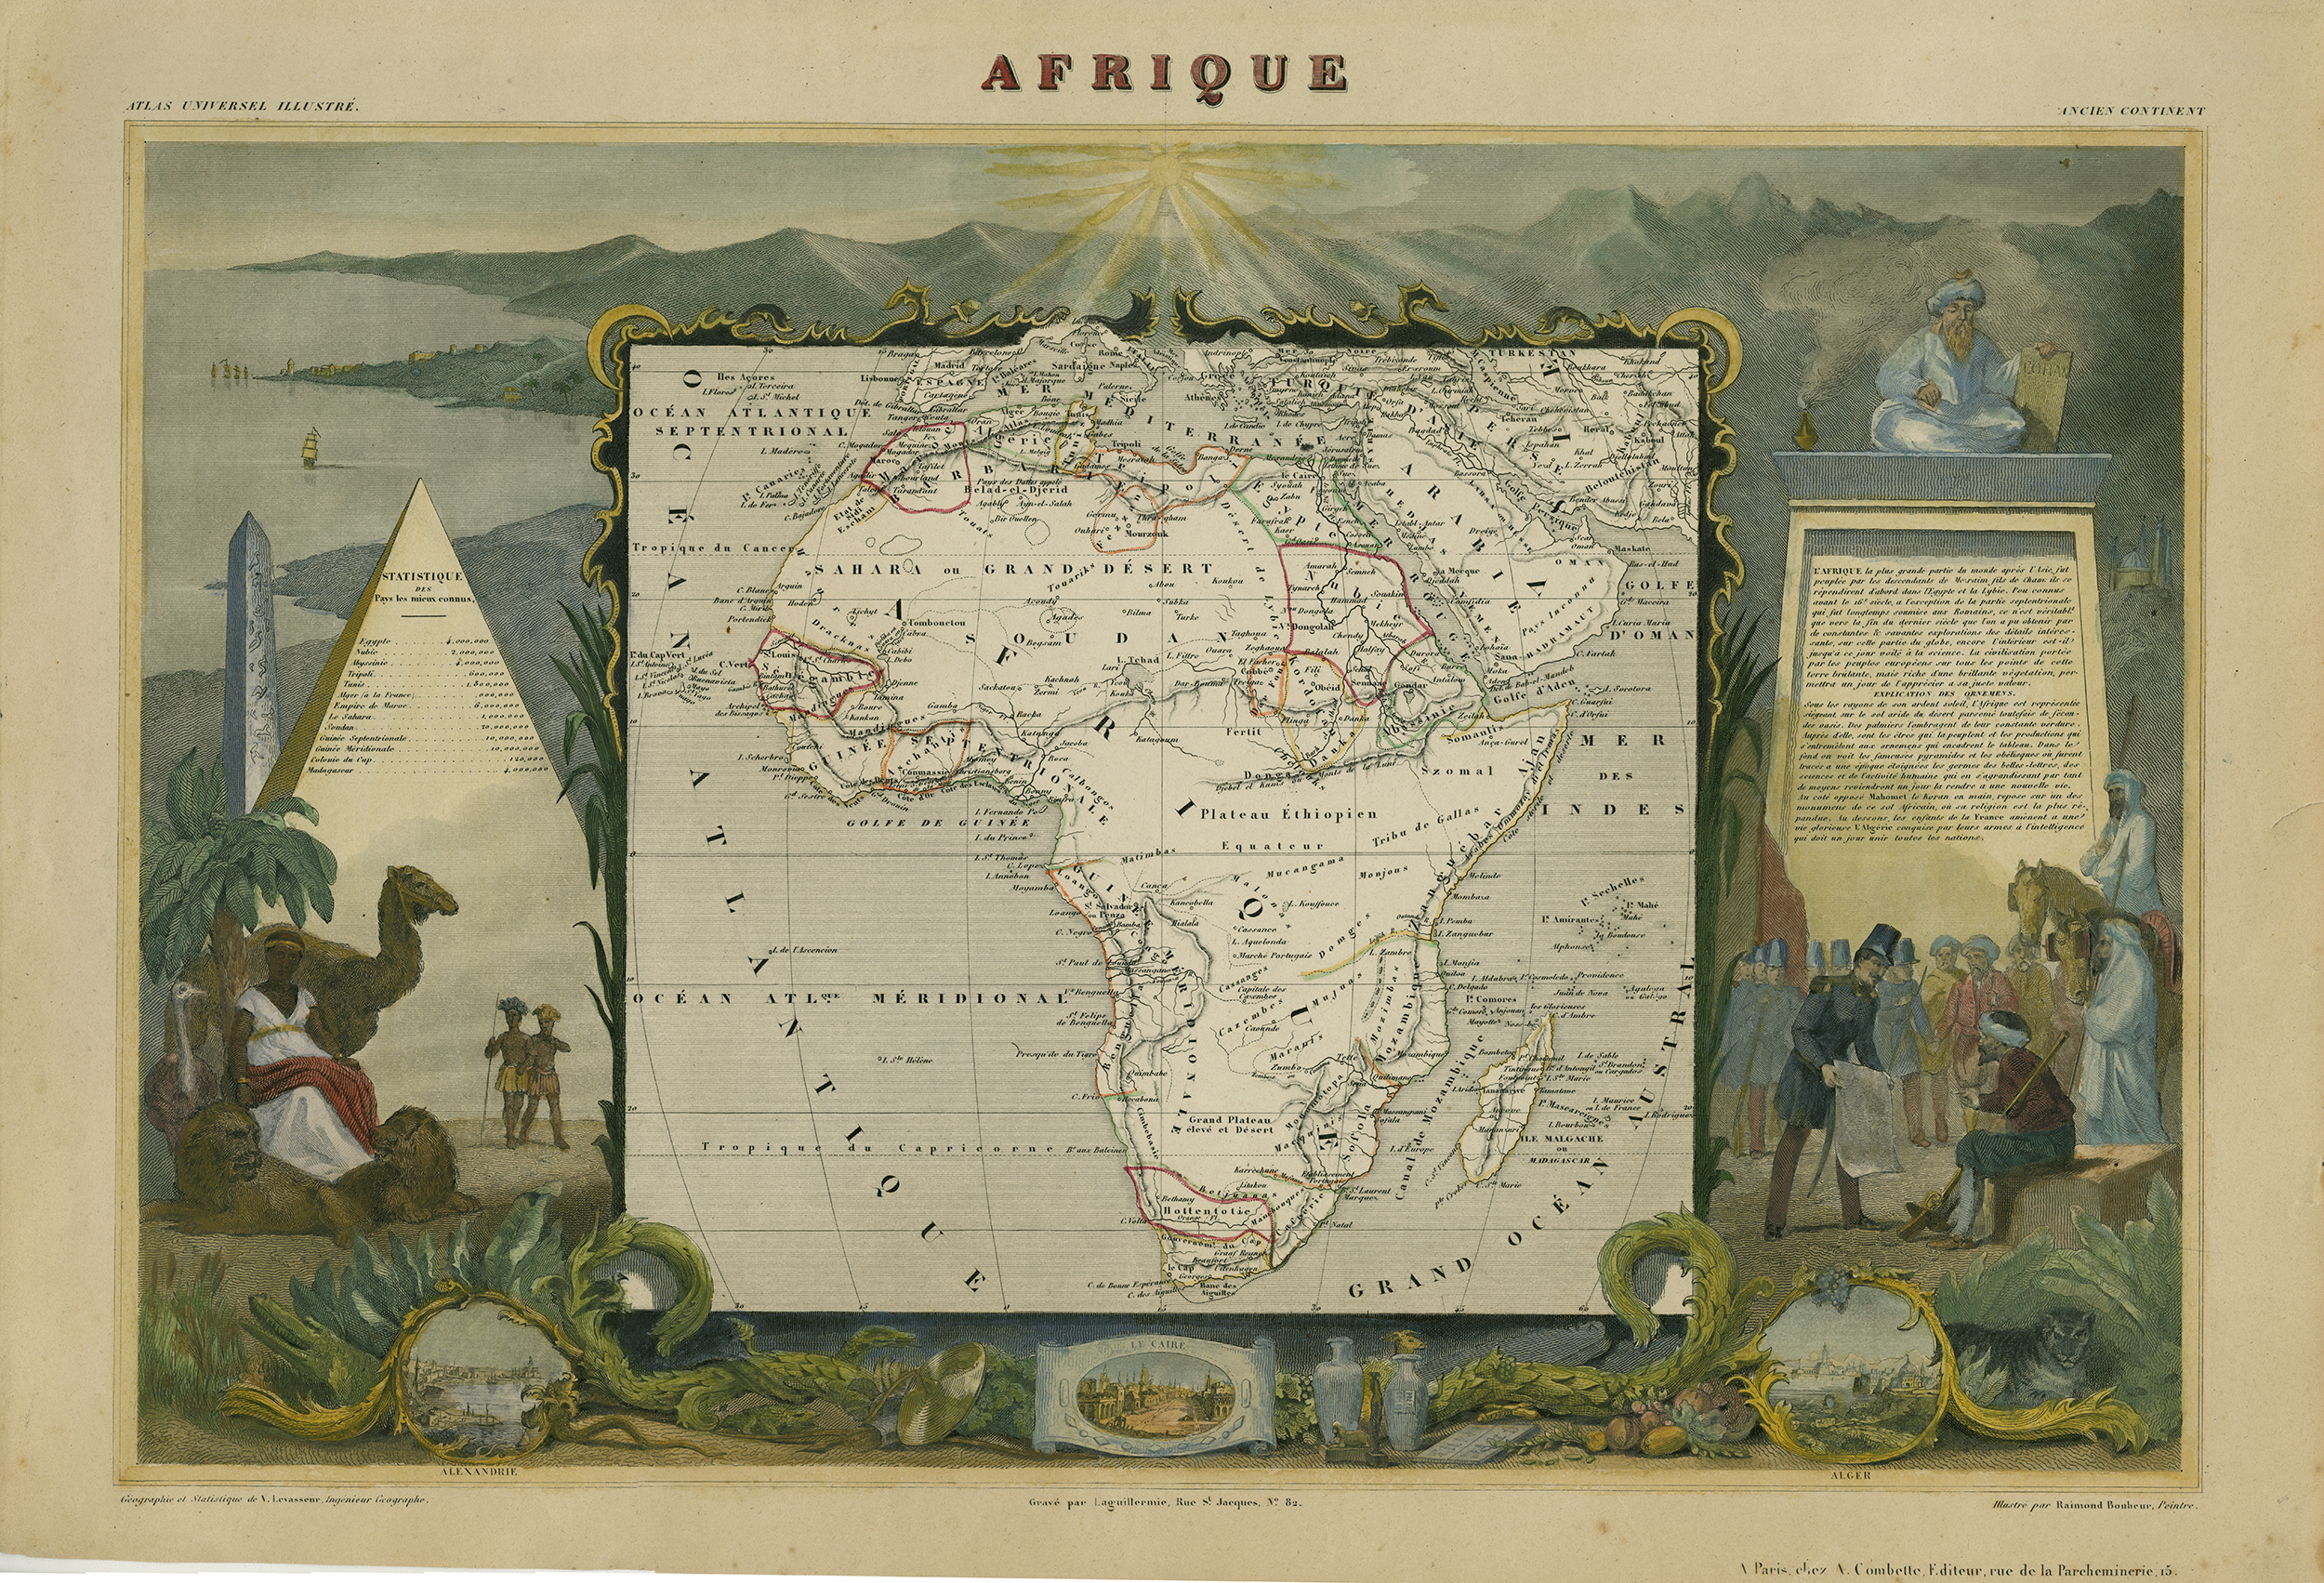 A map of Africa, with decorative illustrations on all edges depicting various scenes and animal life